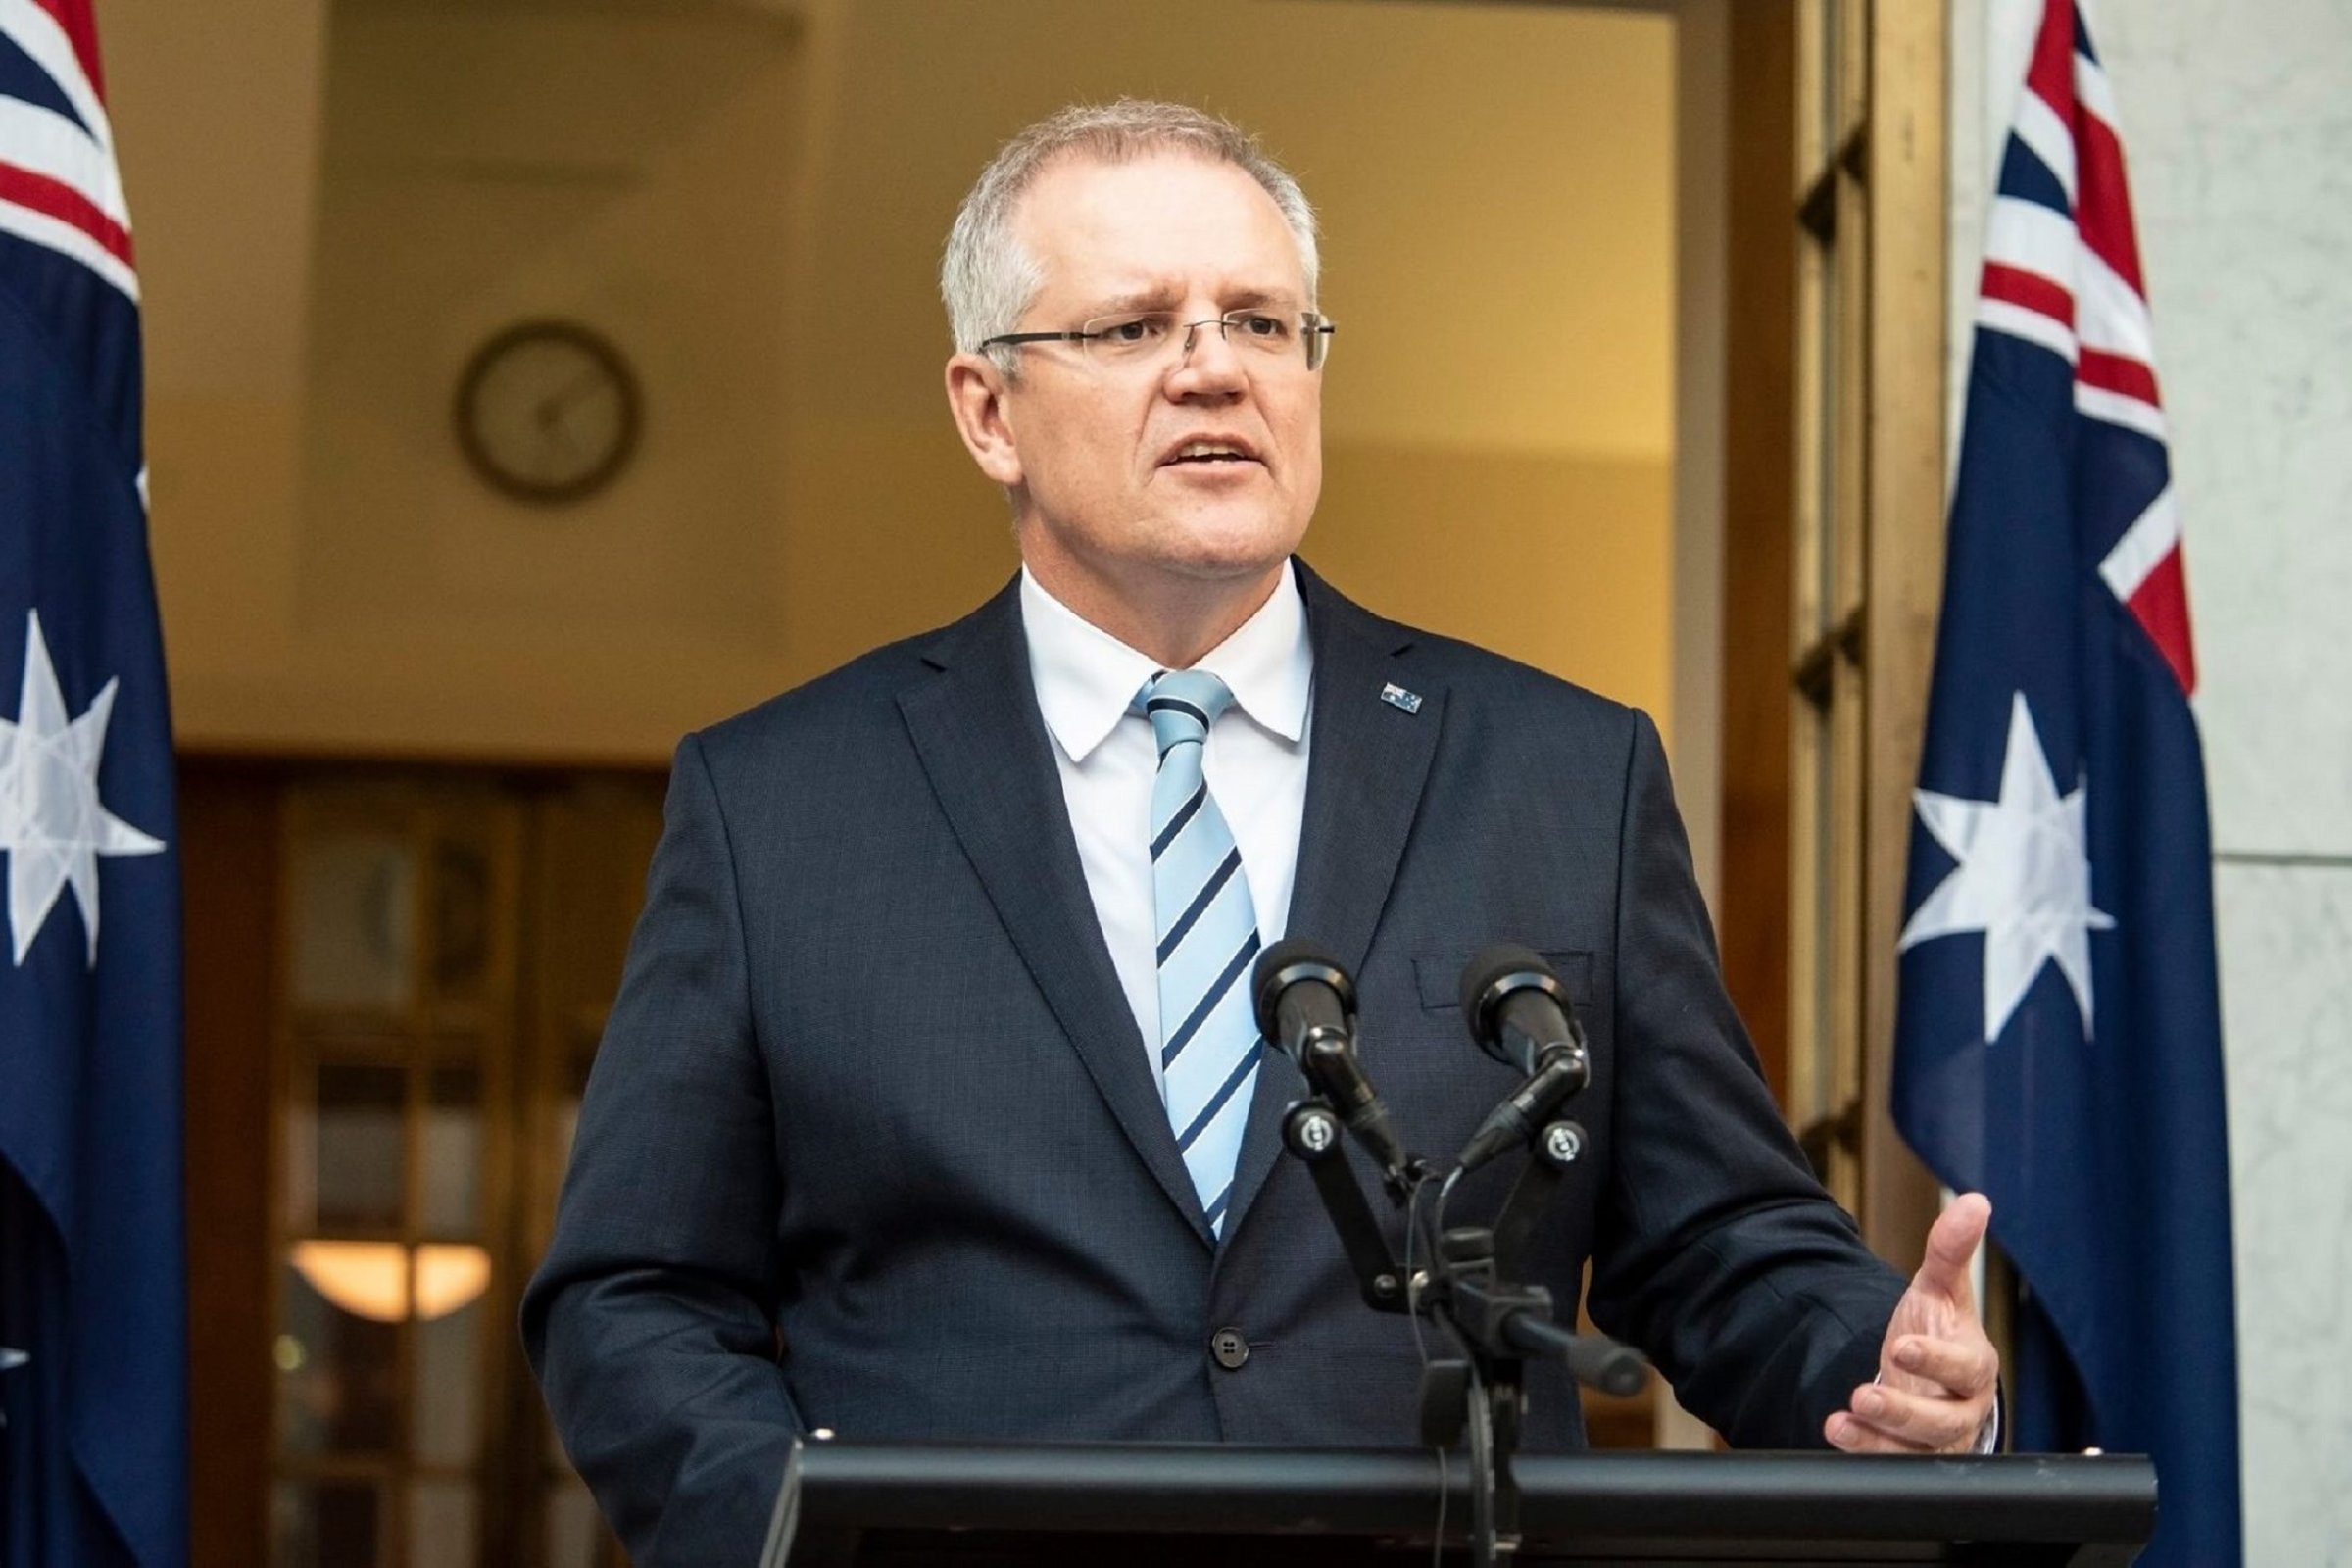 “The Bible is not a policy handbook”: Yet another Christian Australian PM